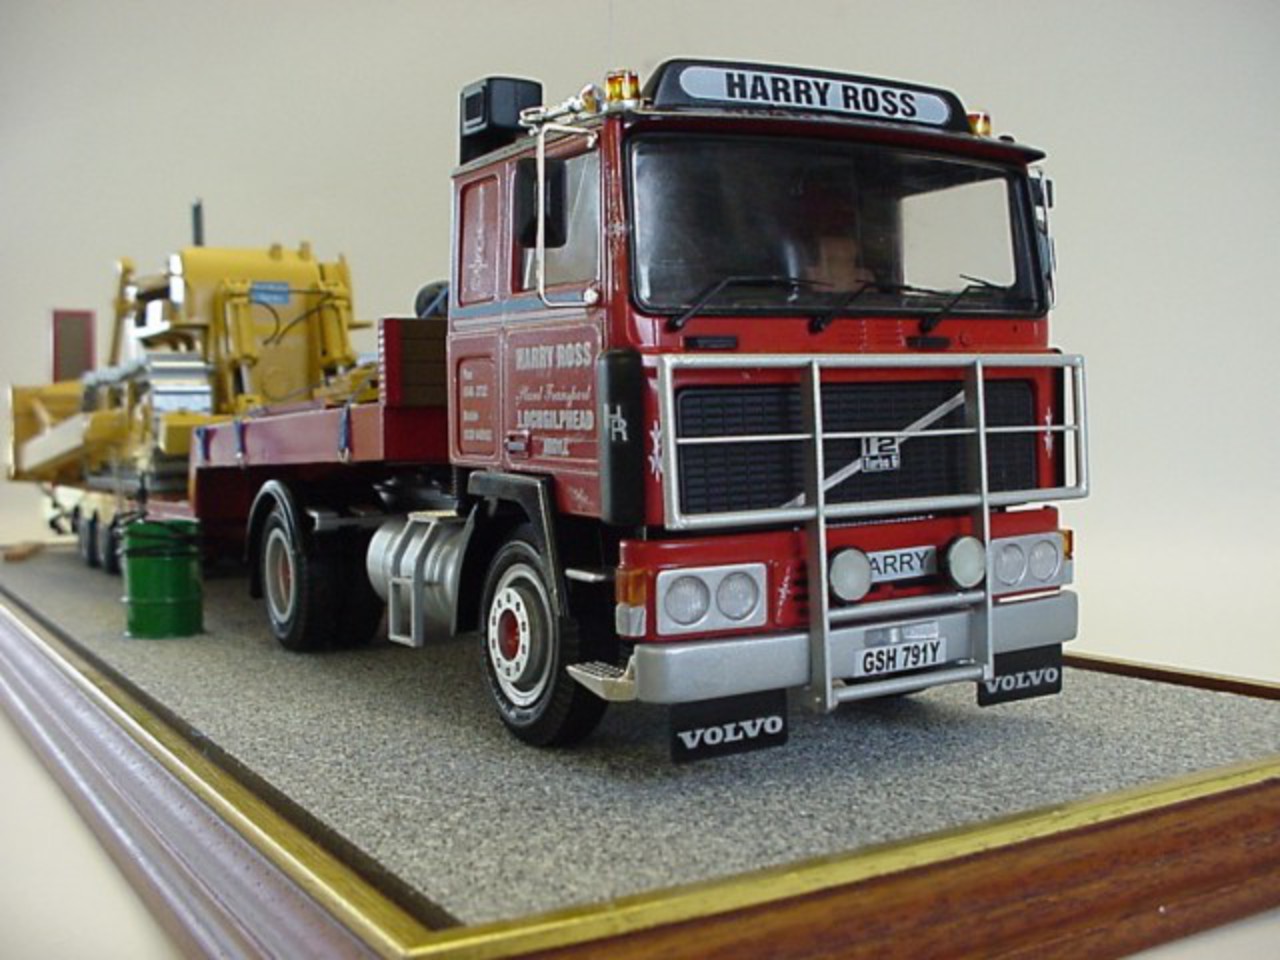 Volvo F10 and low loader in 1:25 scale. This was an old Matchbox Volvo kit,